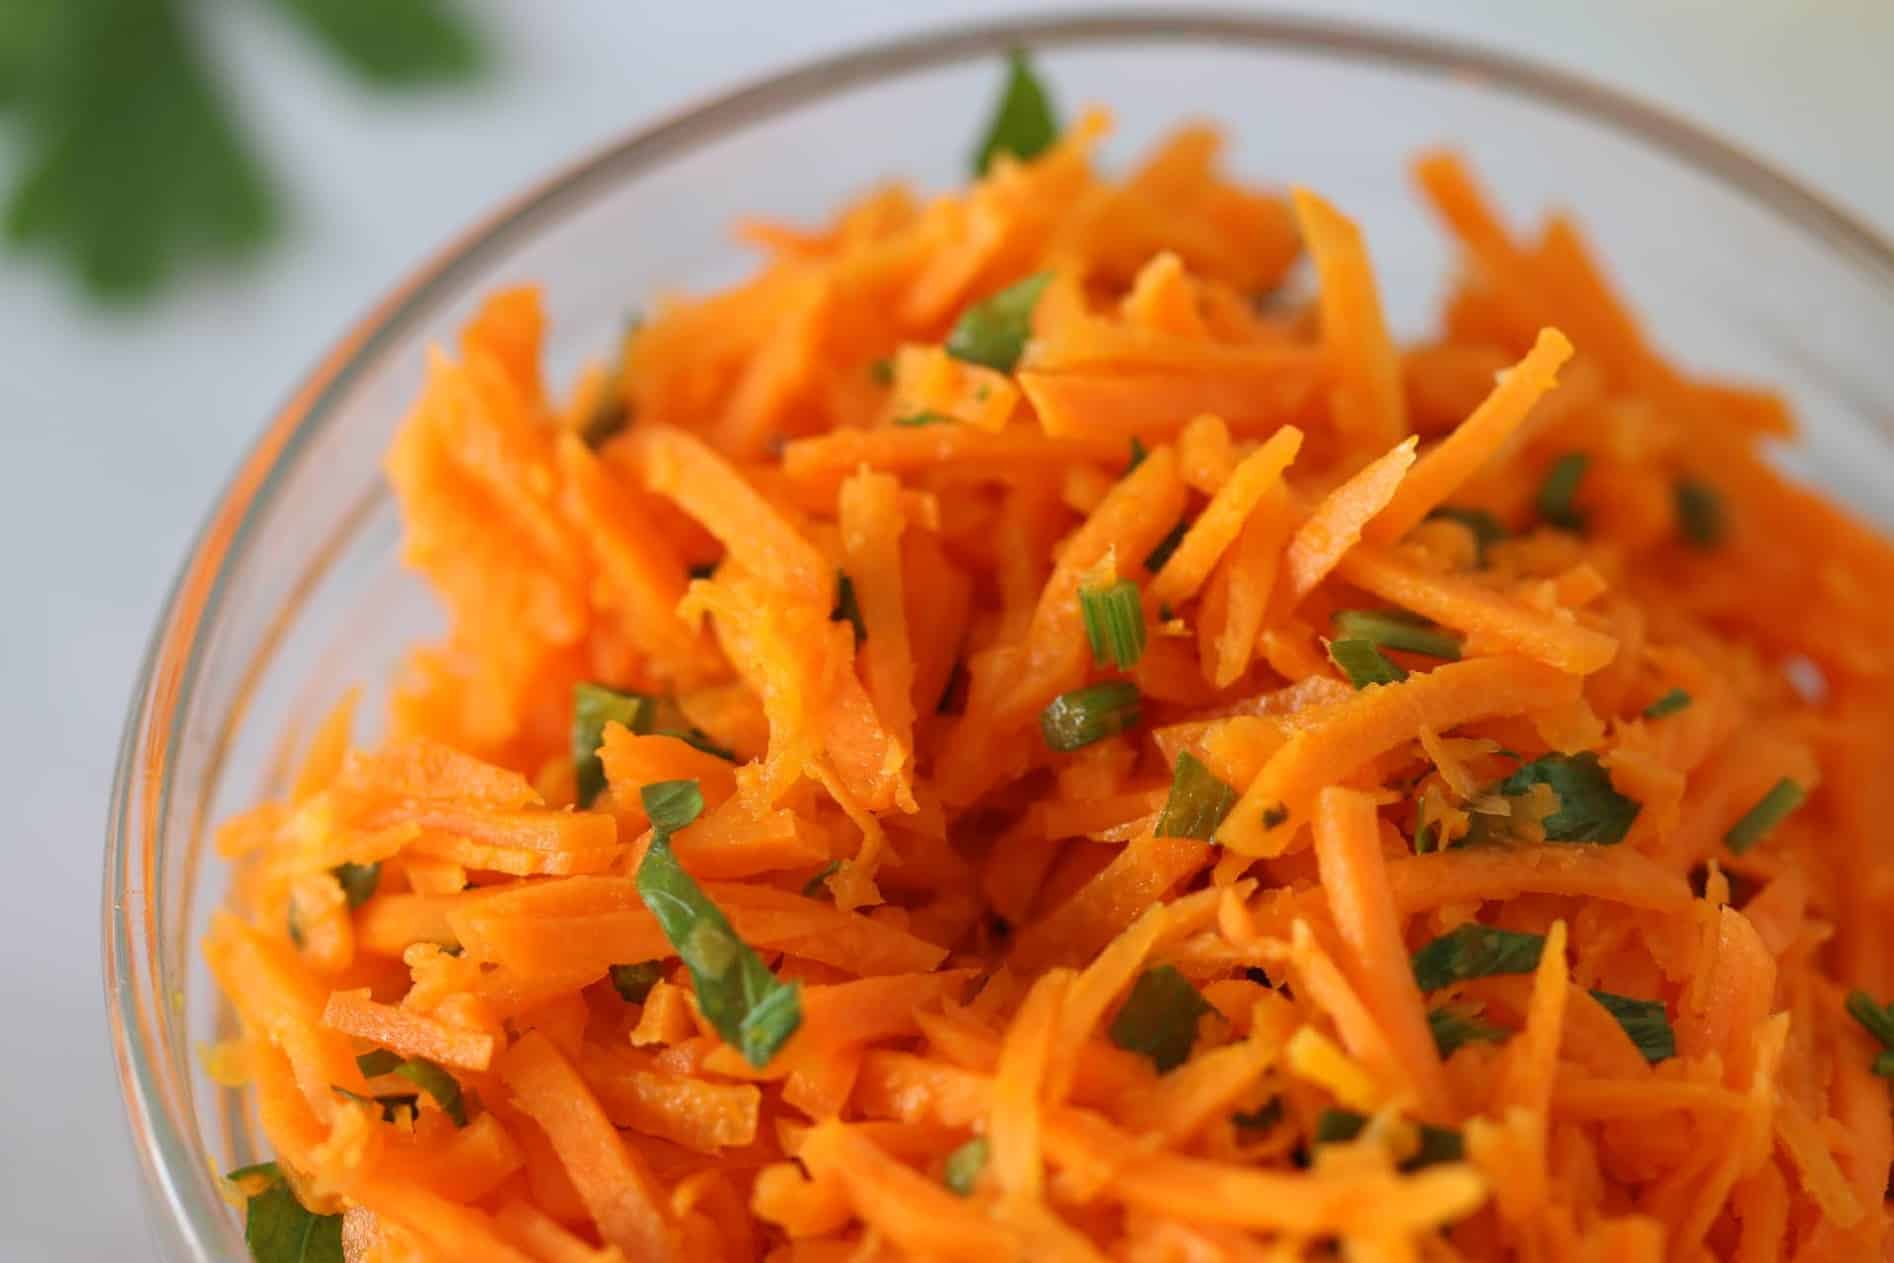 Carrot Parsley Salad in a bowl